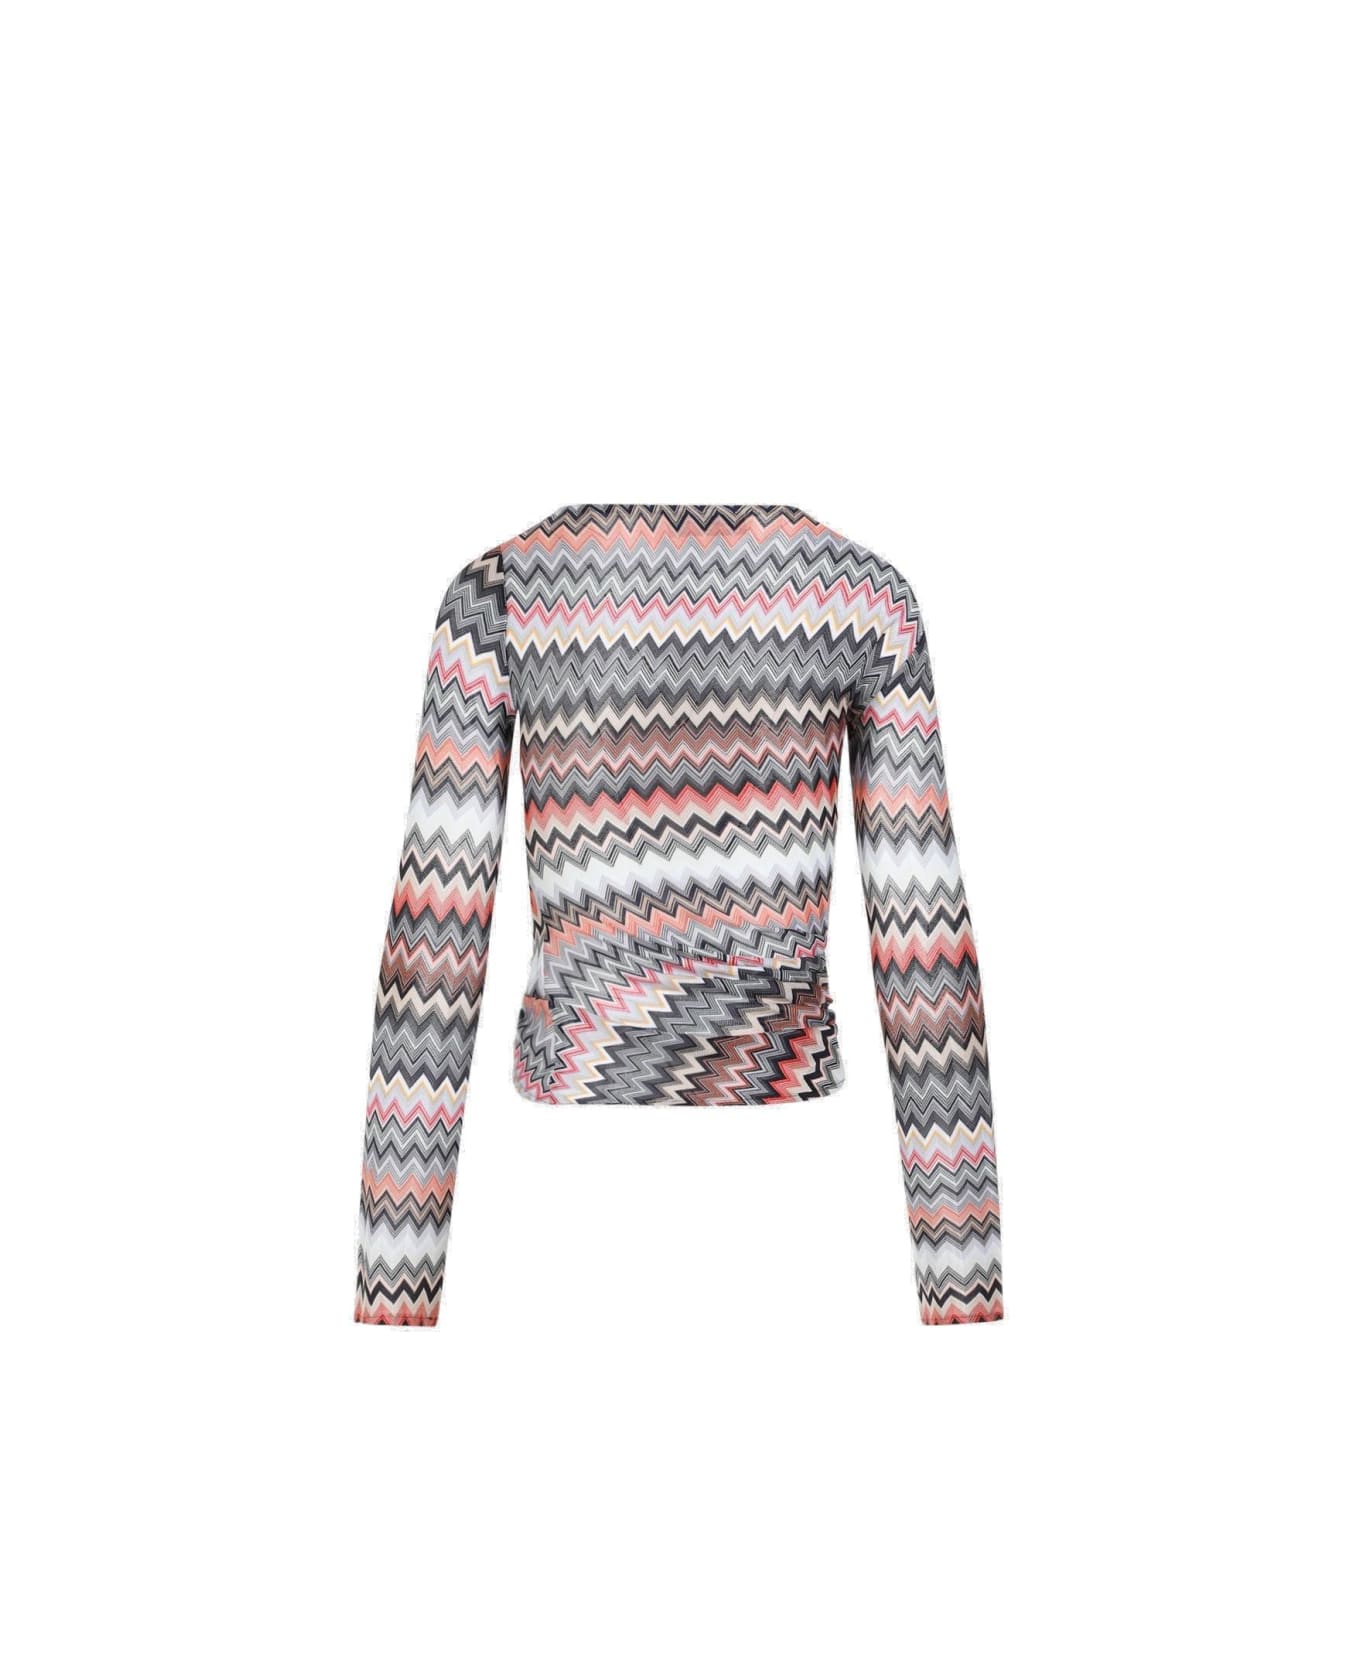 Missoni Zigzag Long-sleeved Top - Multicolor トップス